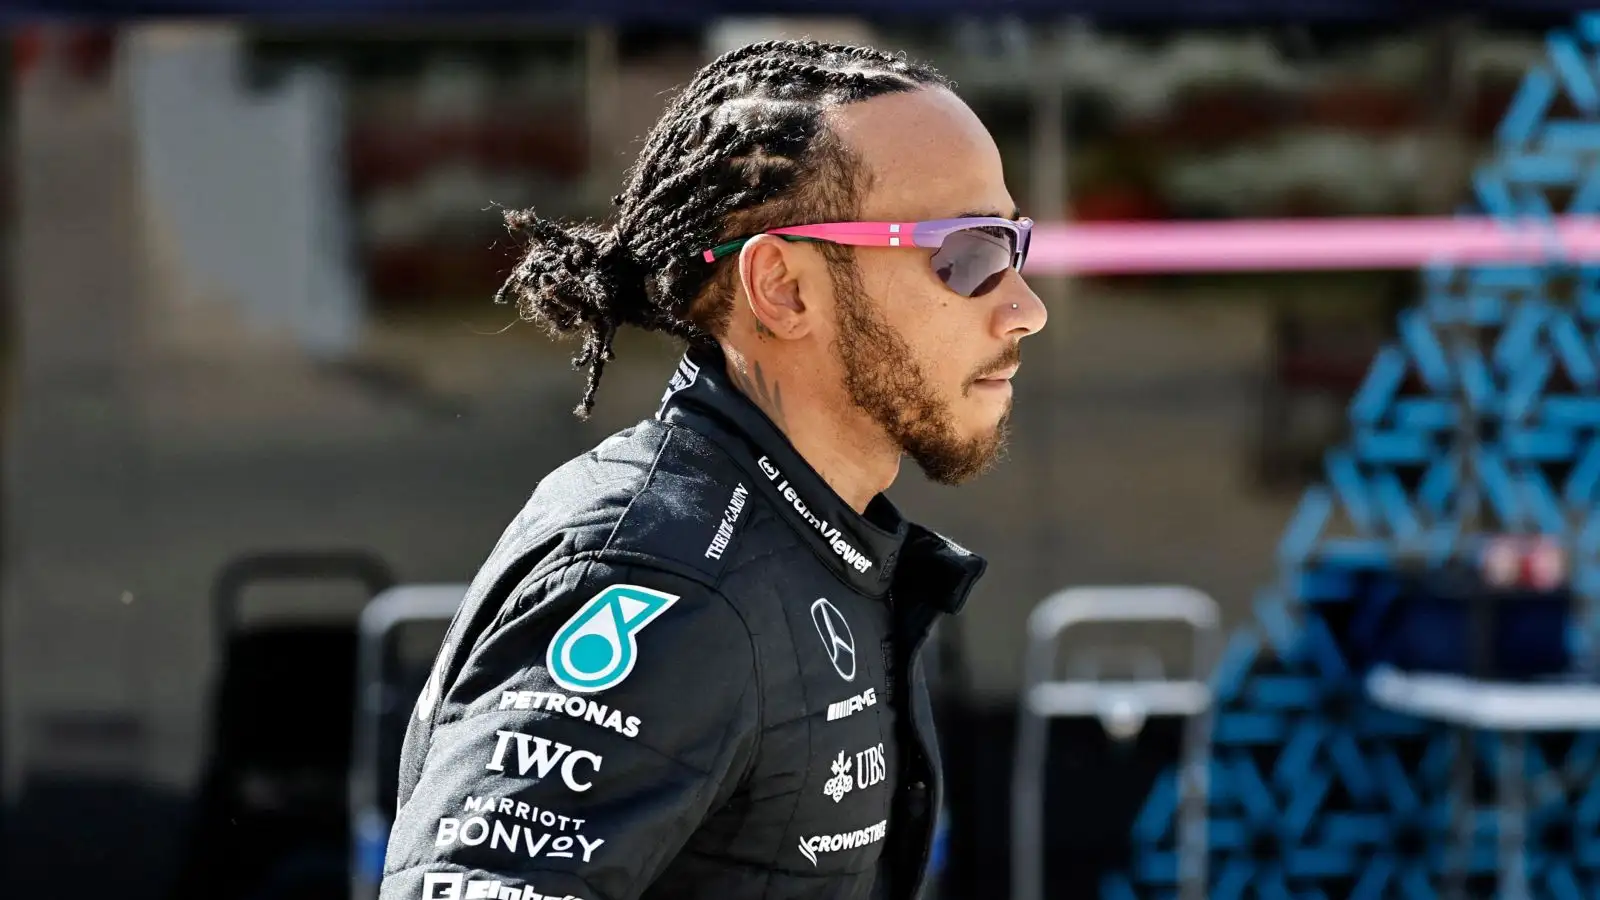 Lewis Hamilton, Mercedes, in the paddock during testing. Bahrain, February 2023.